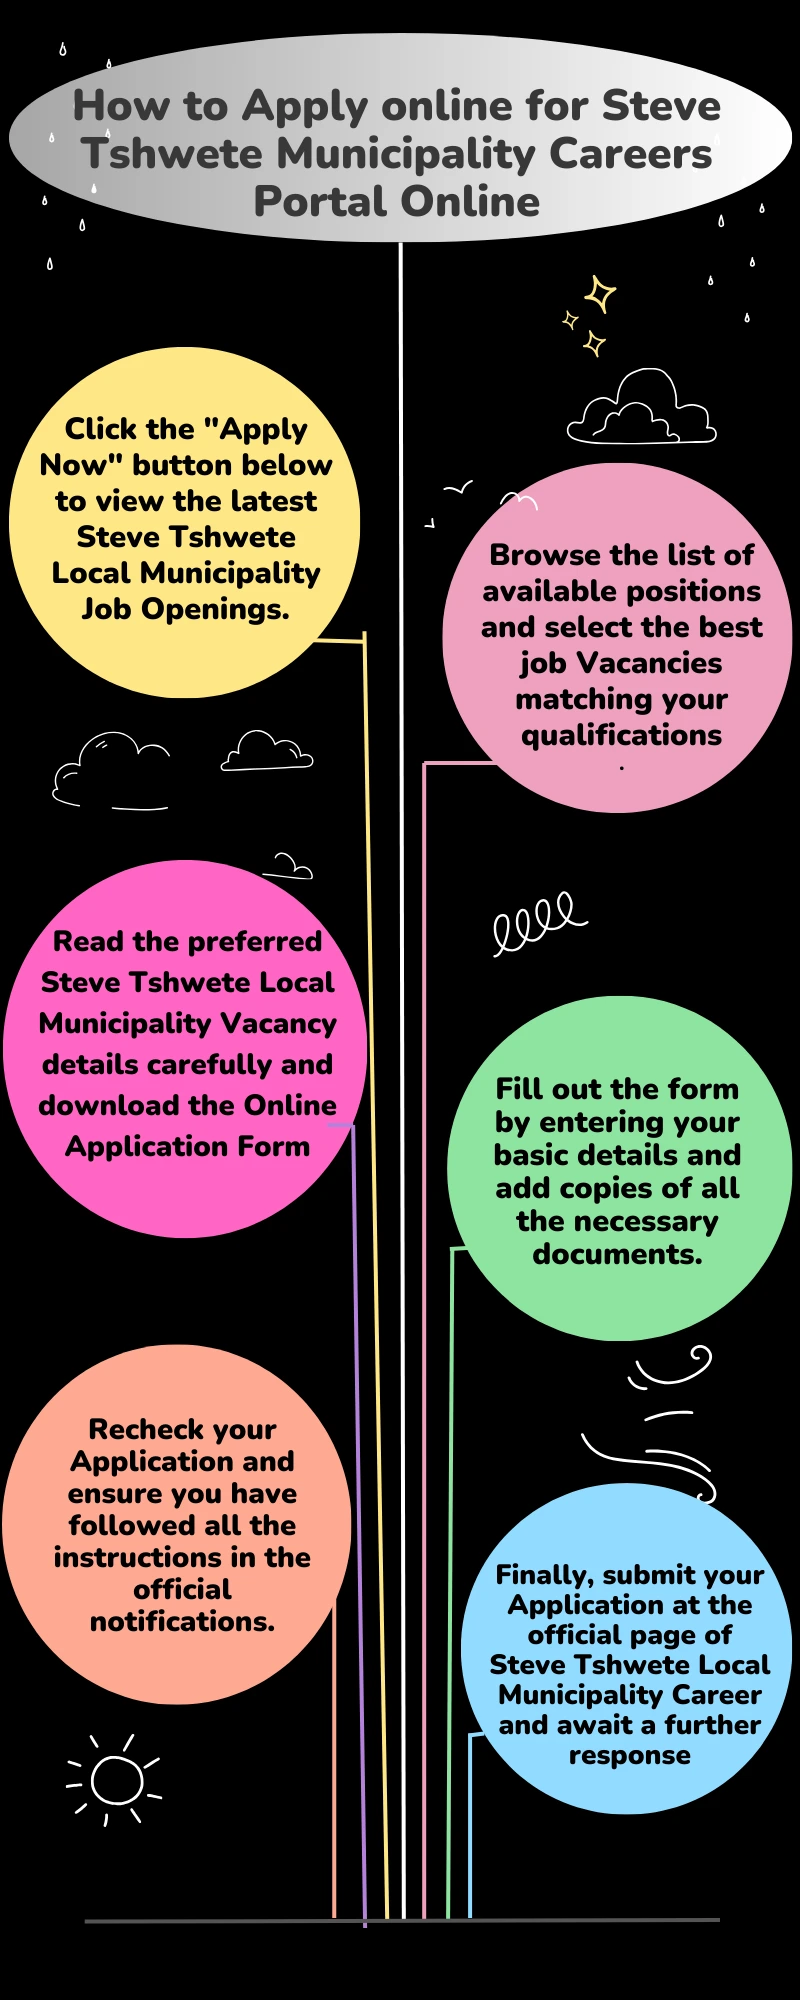 How to Apply online for Steve Tshwete Municipality Careers Portal Online